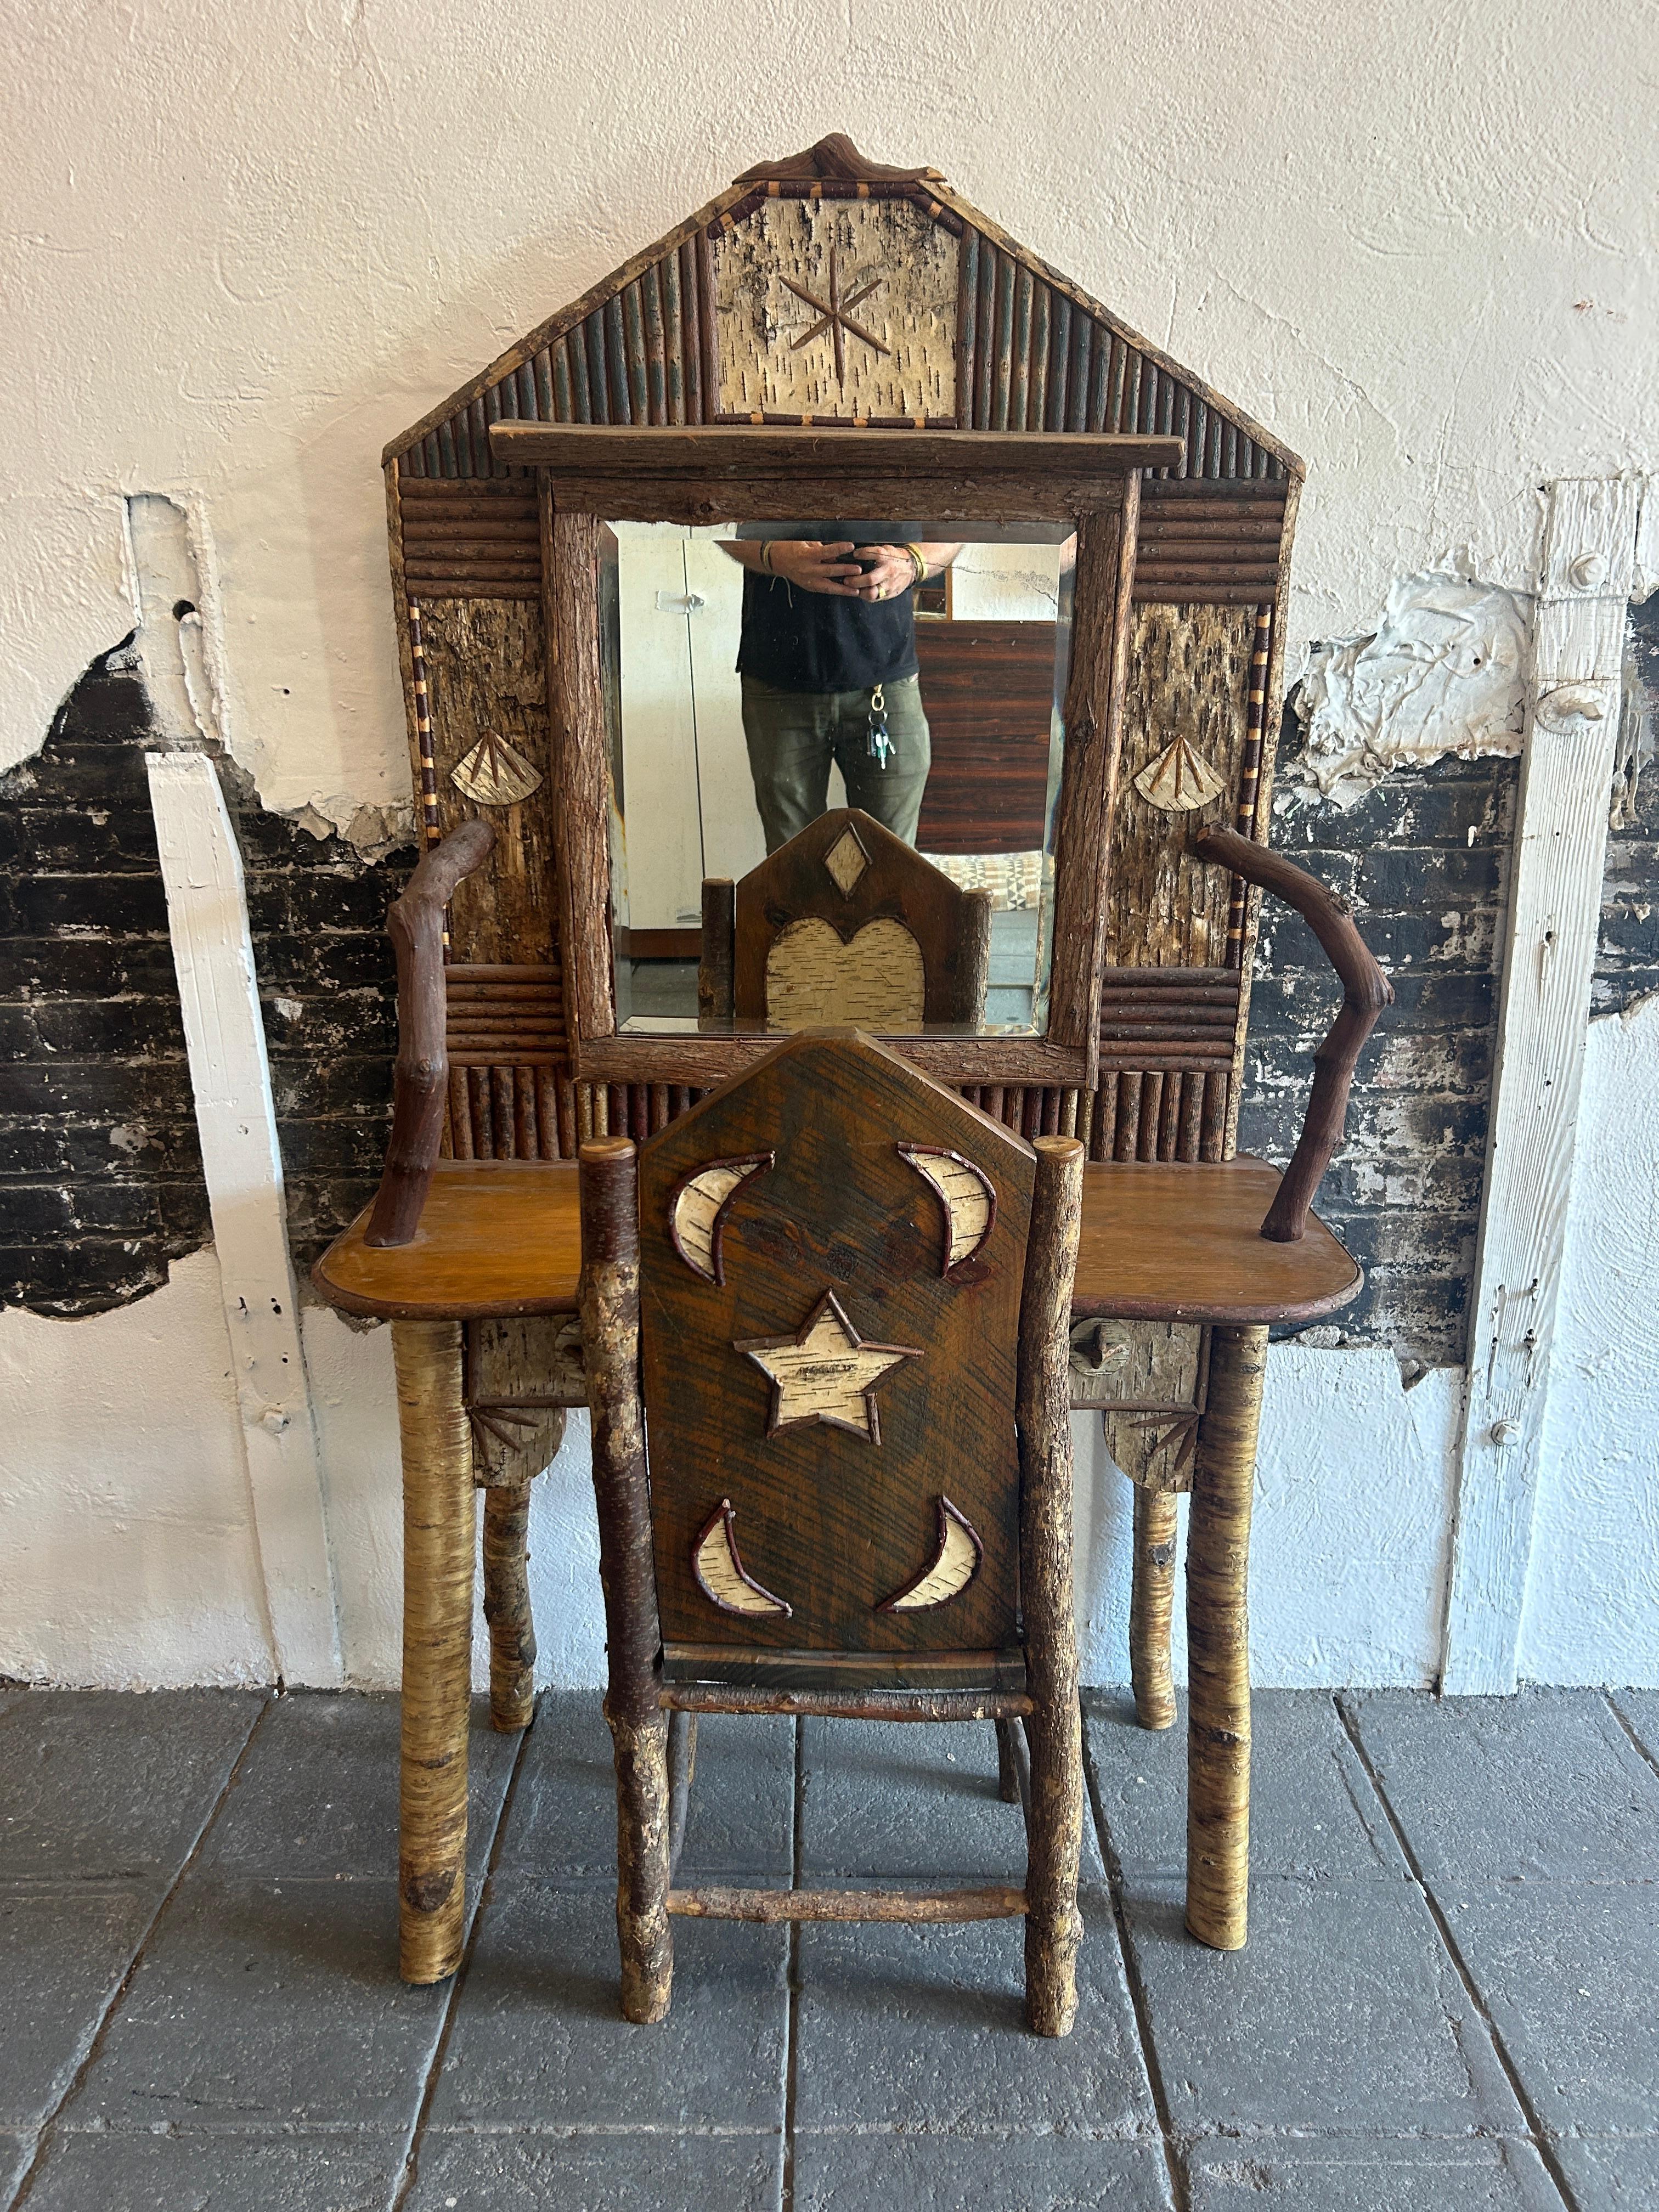 Whimsical rustic Adirondack child’s Vanity Mirror desk and chair American studio craft. Very beautiful vanity desk for kids great for a cabin or rustic designed property. All hand made in USA from local trees and wood in organic form. Truly a unique